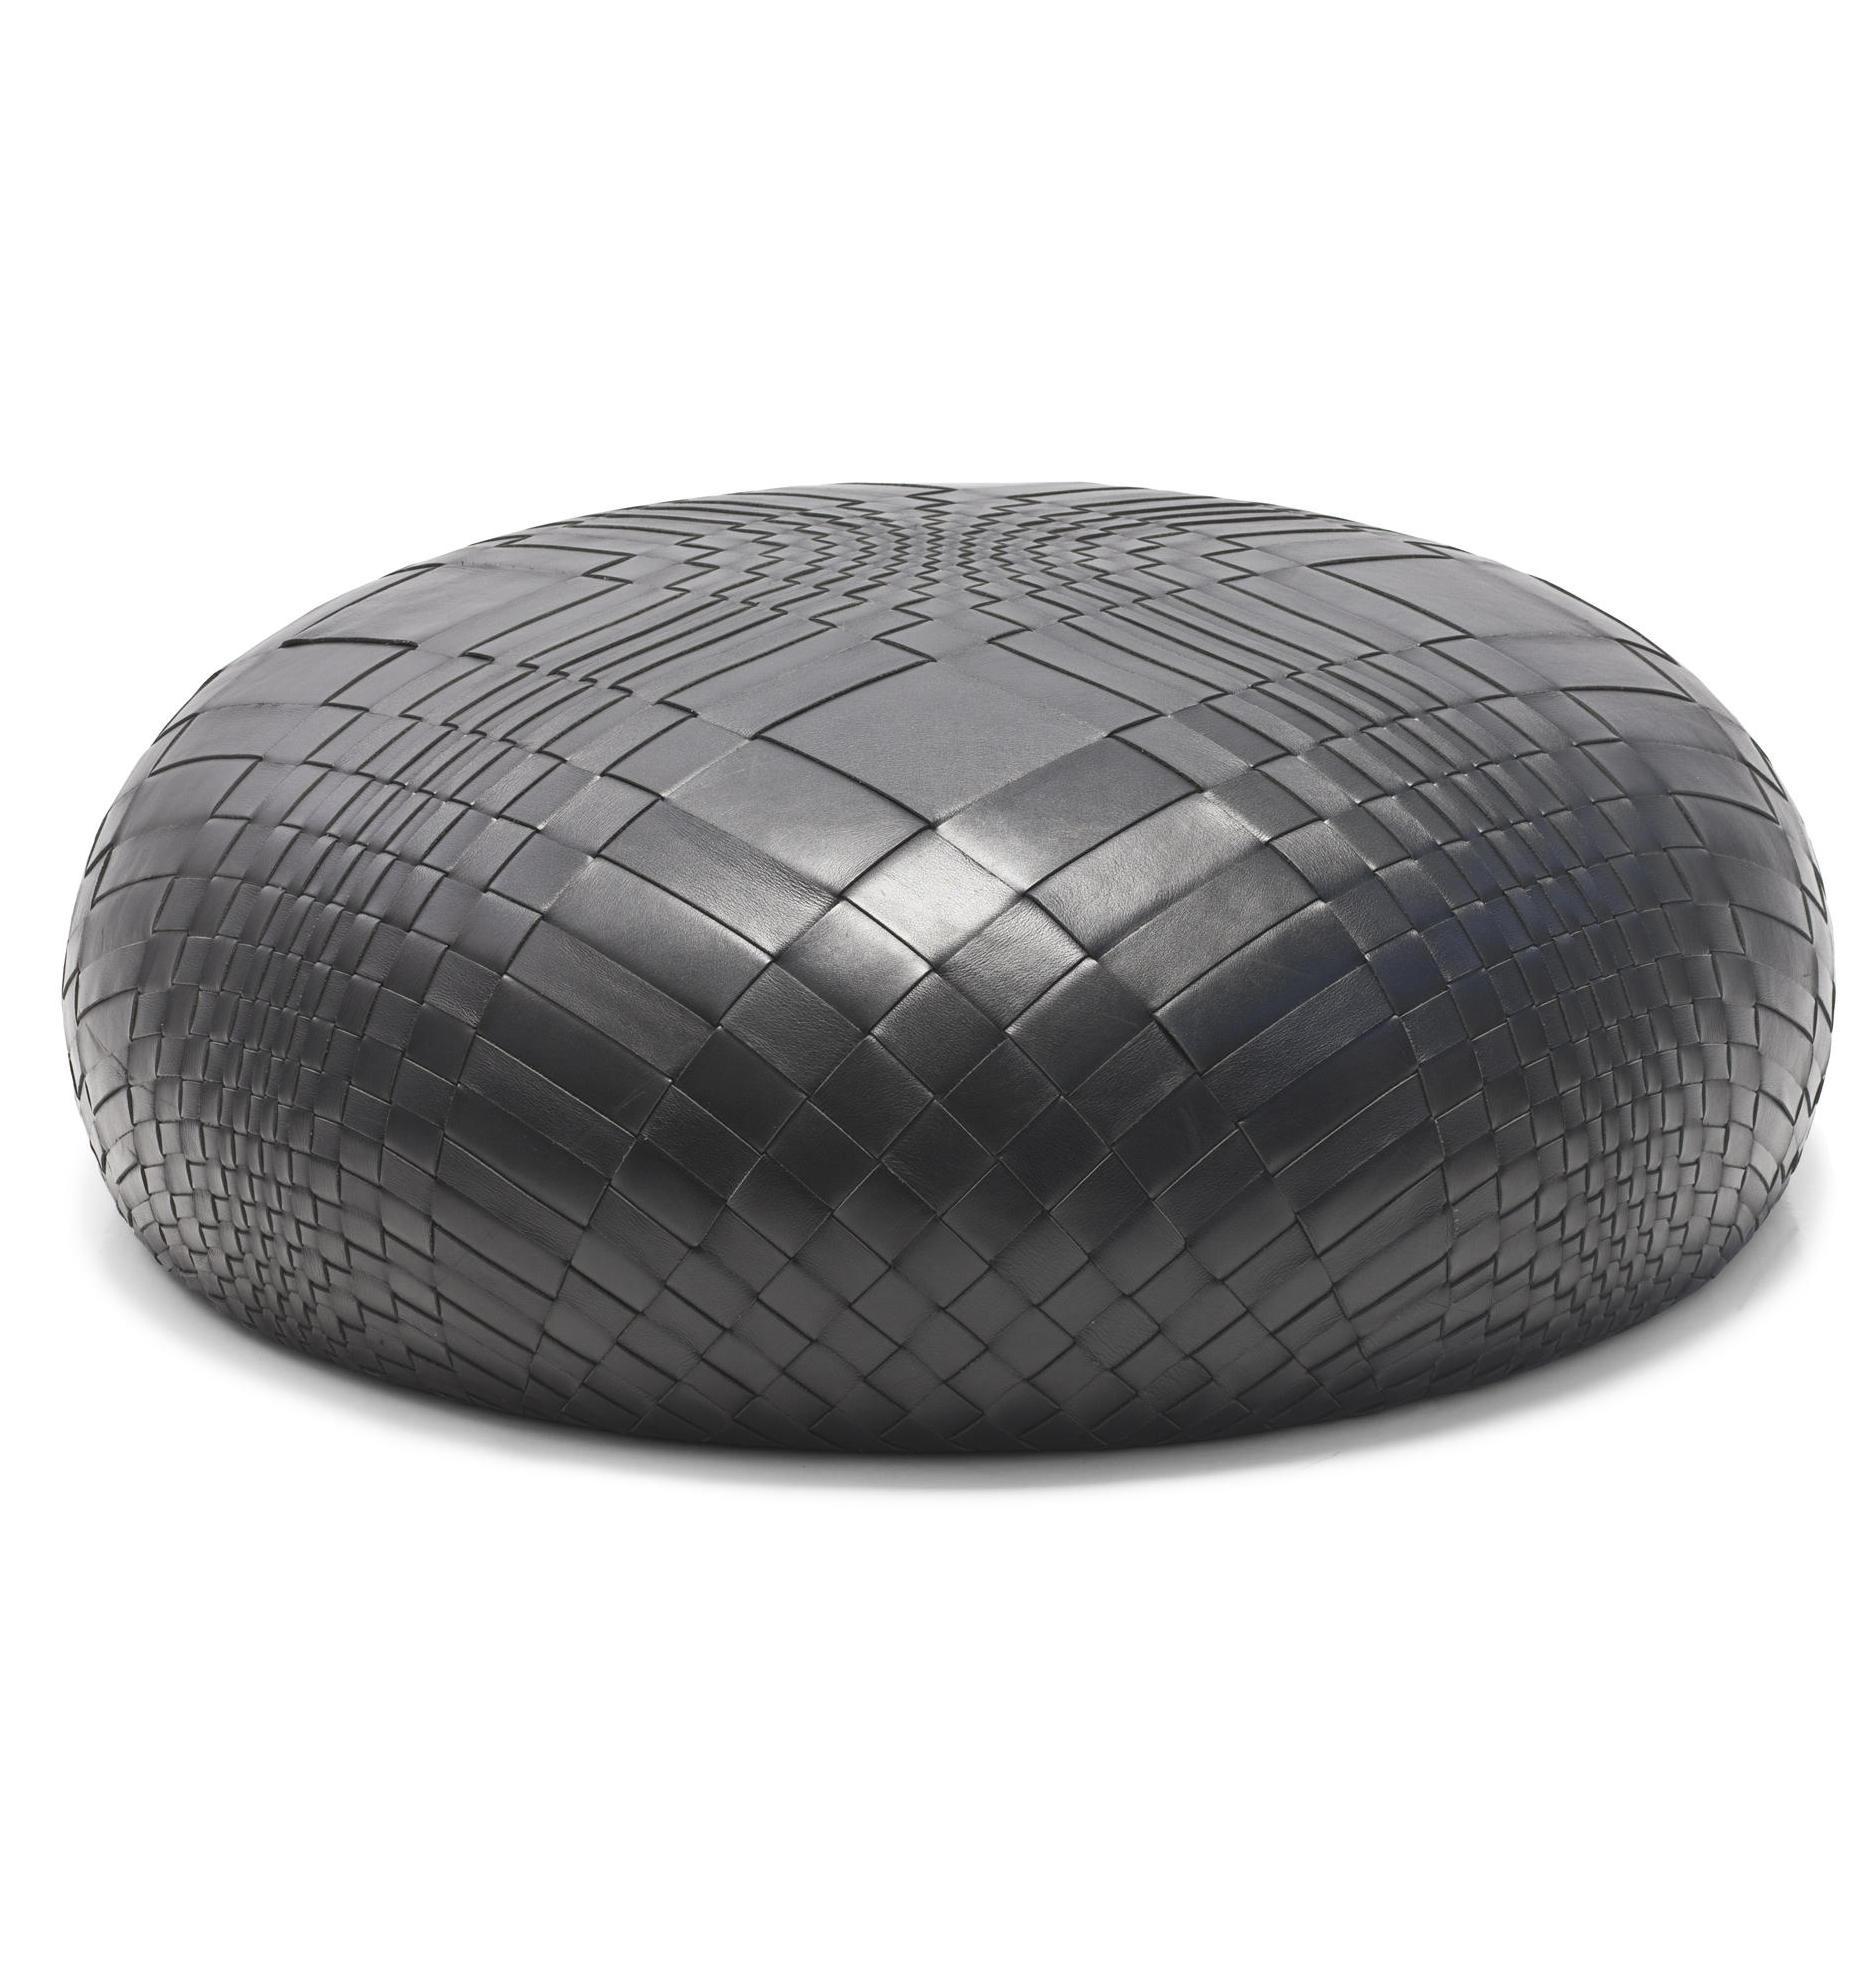 Moroso Dew Pouf Small or Large in Handwoven Leather by Nendo For Sale 2